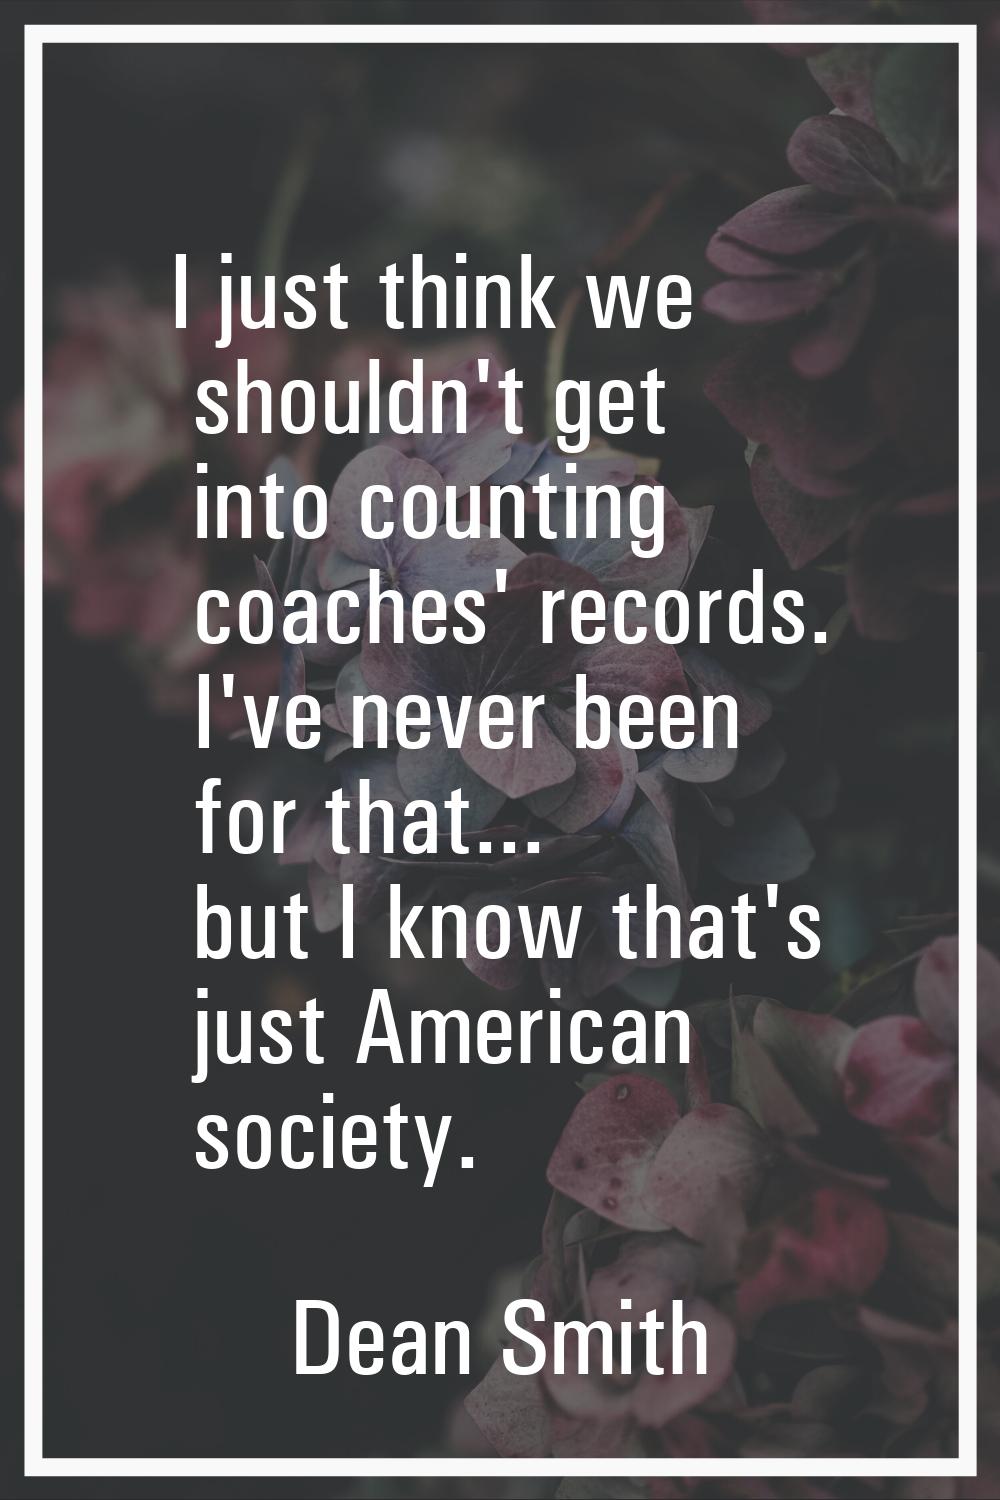 I just think we shouldn't get into counting coaches' records. I've never been for that... but I kno